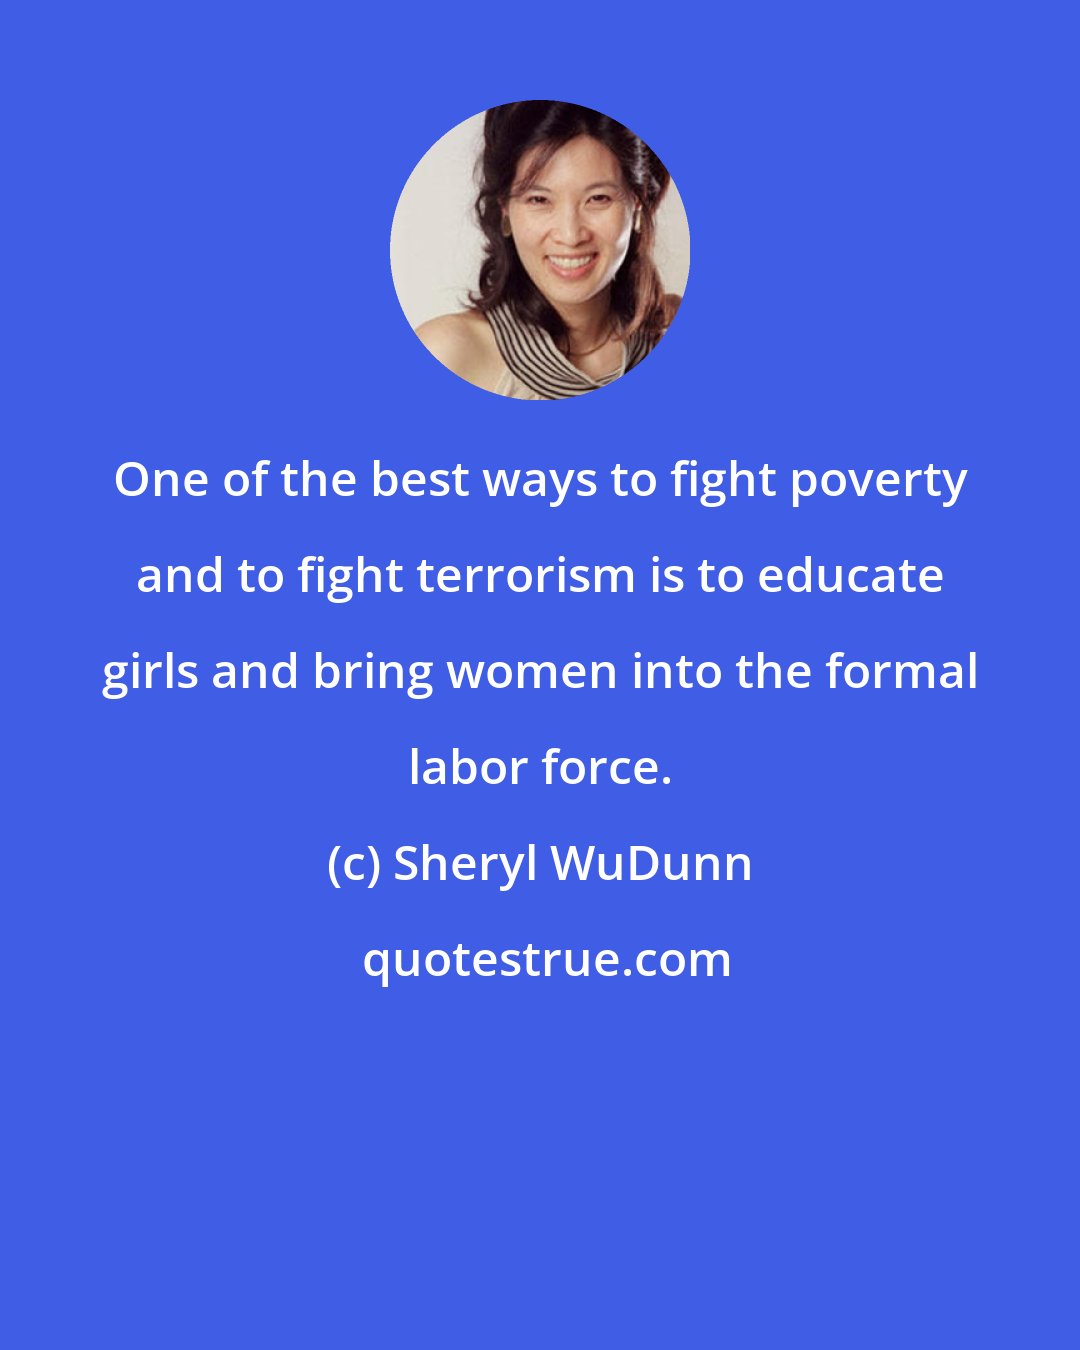 Sheryl WuDunn: One of the best ways to fight poverty and to fight terrorism is to educate girls and bring women into the formal labor force.